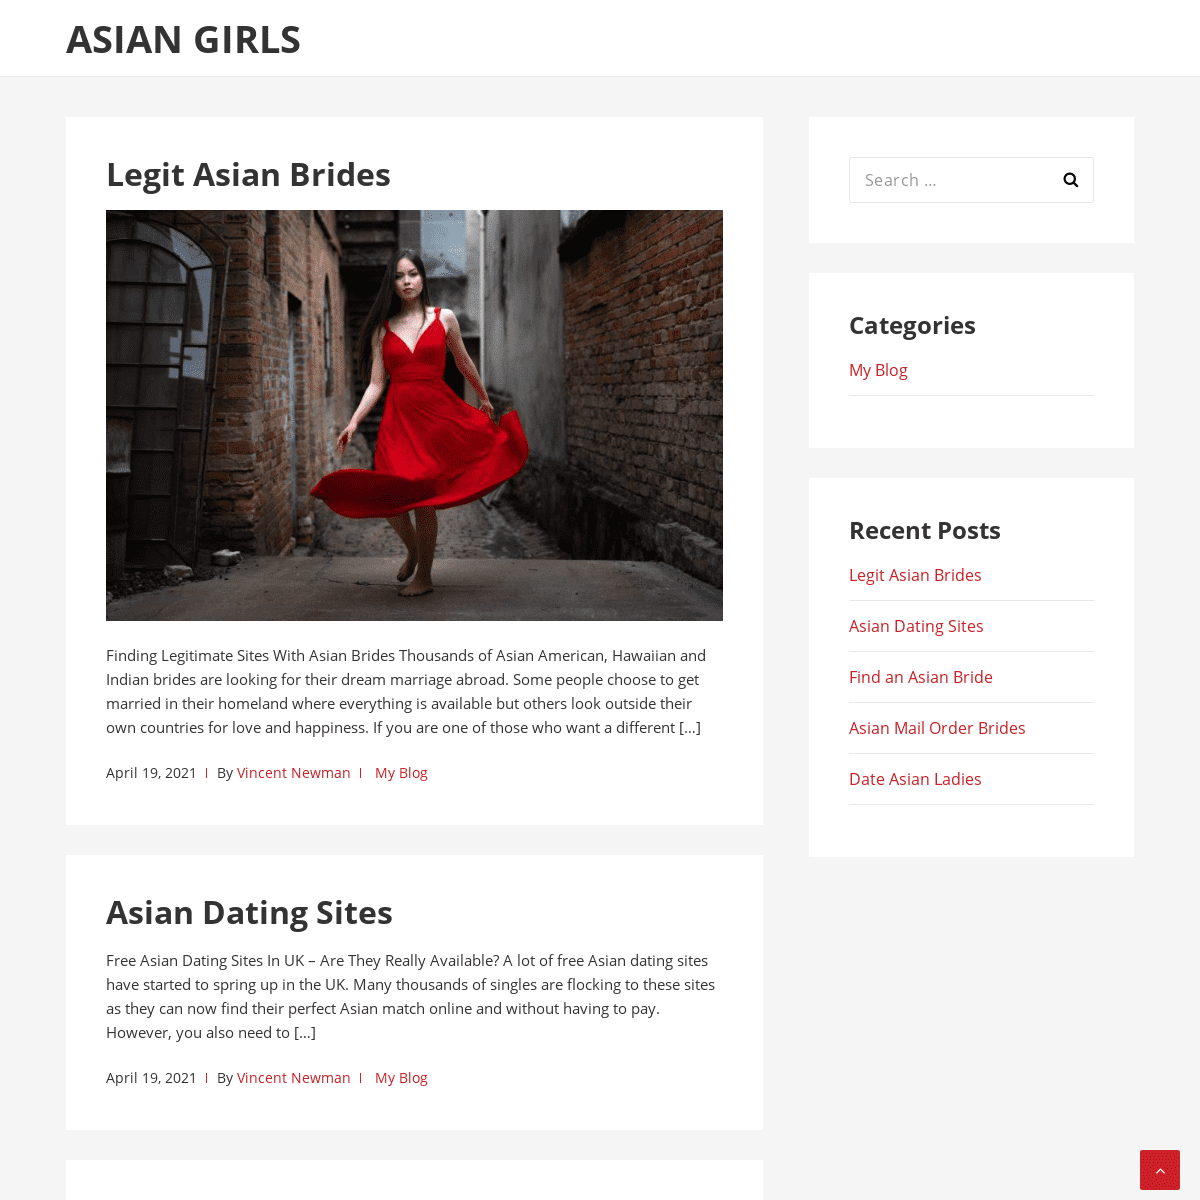 A complete backup of https://asiagirls.org